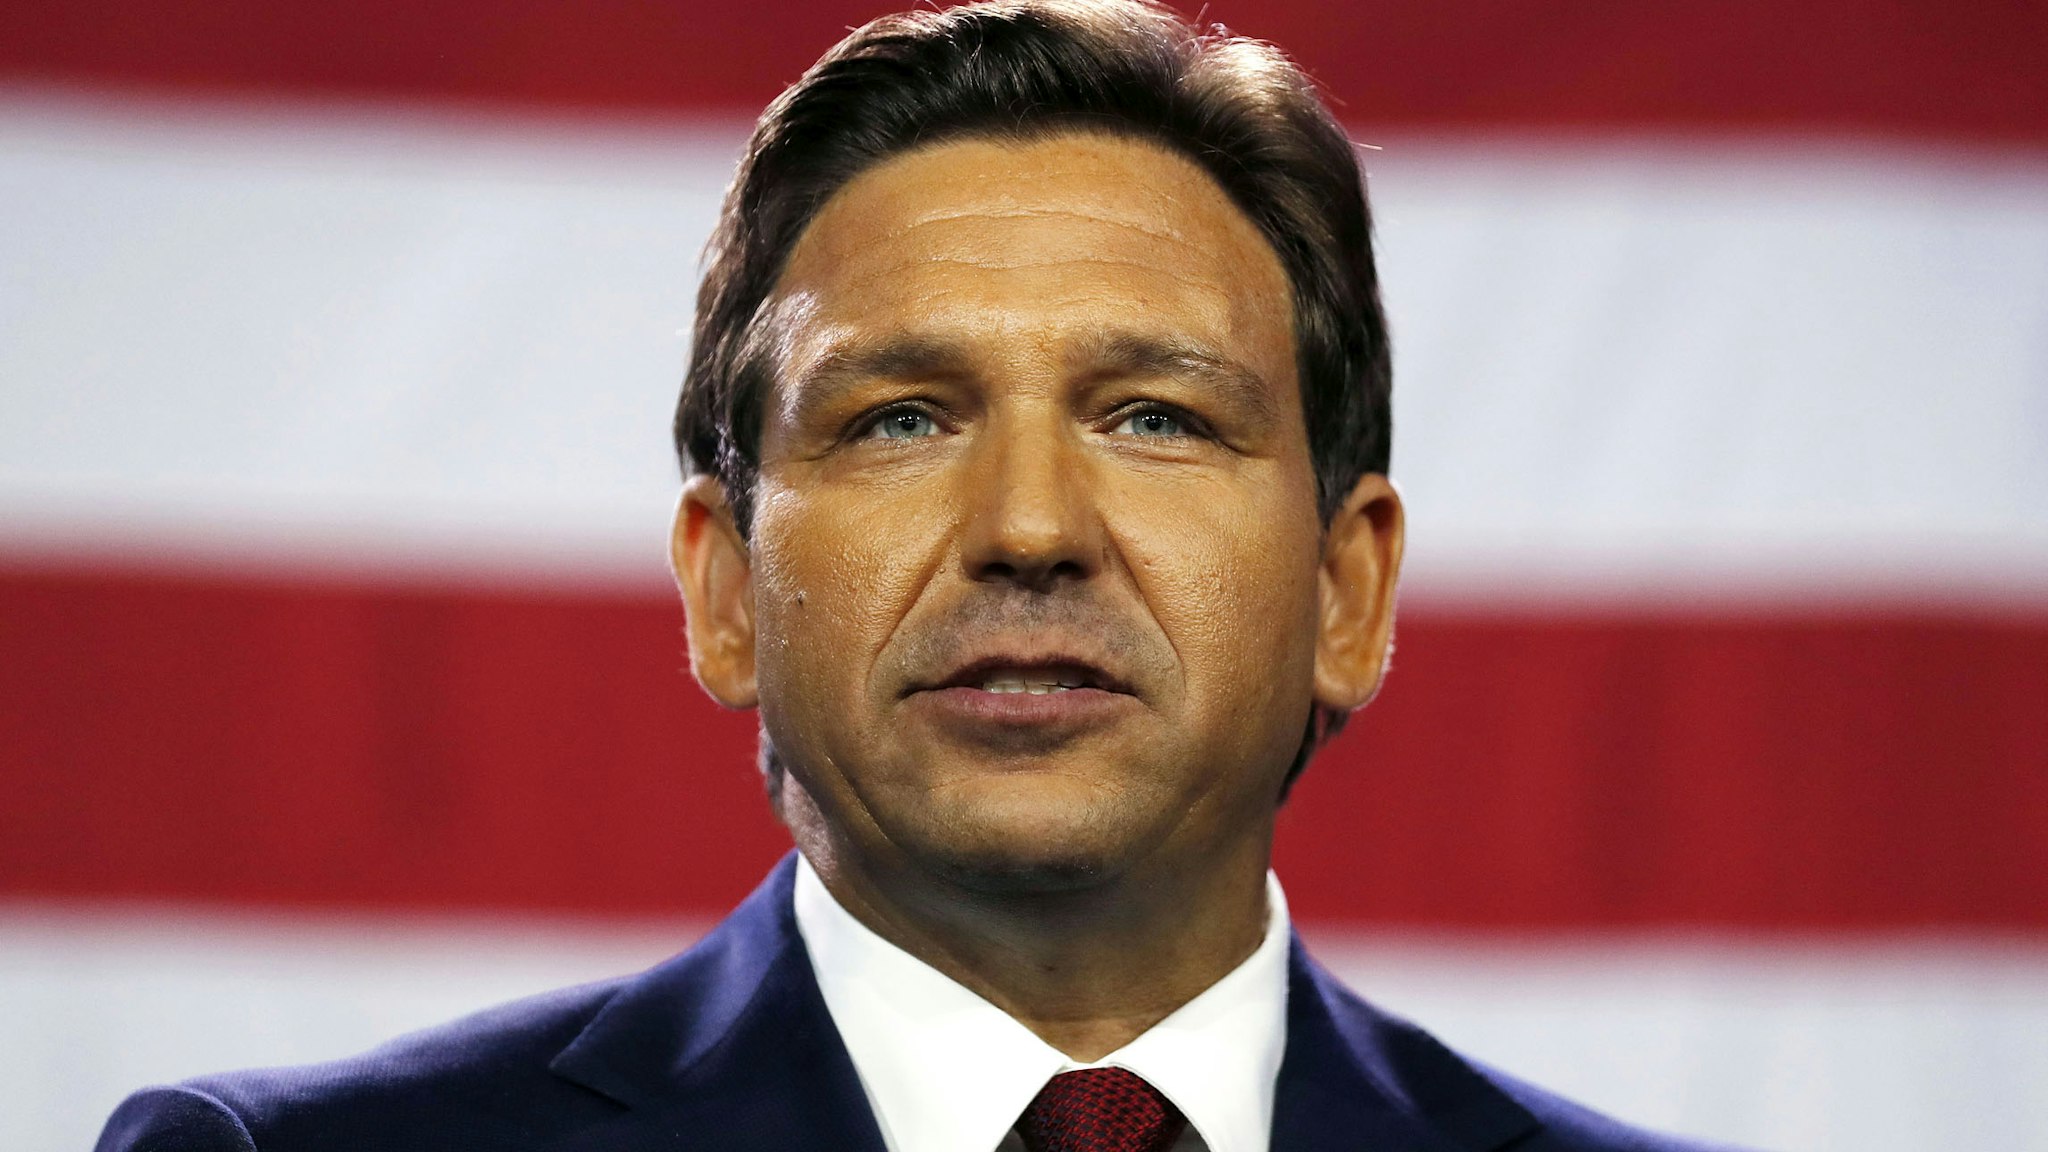 TAMPA, FL - NOVEMBER 08: Florida Gov. Ron DeSantis gives a victory speech after defeating Democratic gubernatorial candidate Rep. Charlie Crist during his election night watch party at the Tampa Convention Center on November 8, 2022 in Tampa, Florida. DeSantis was the projected winner by a double-digit lead.